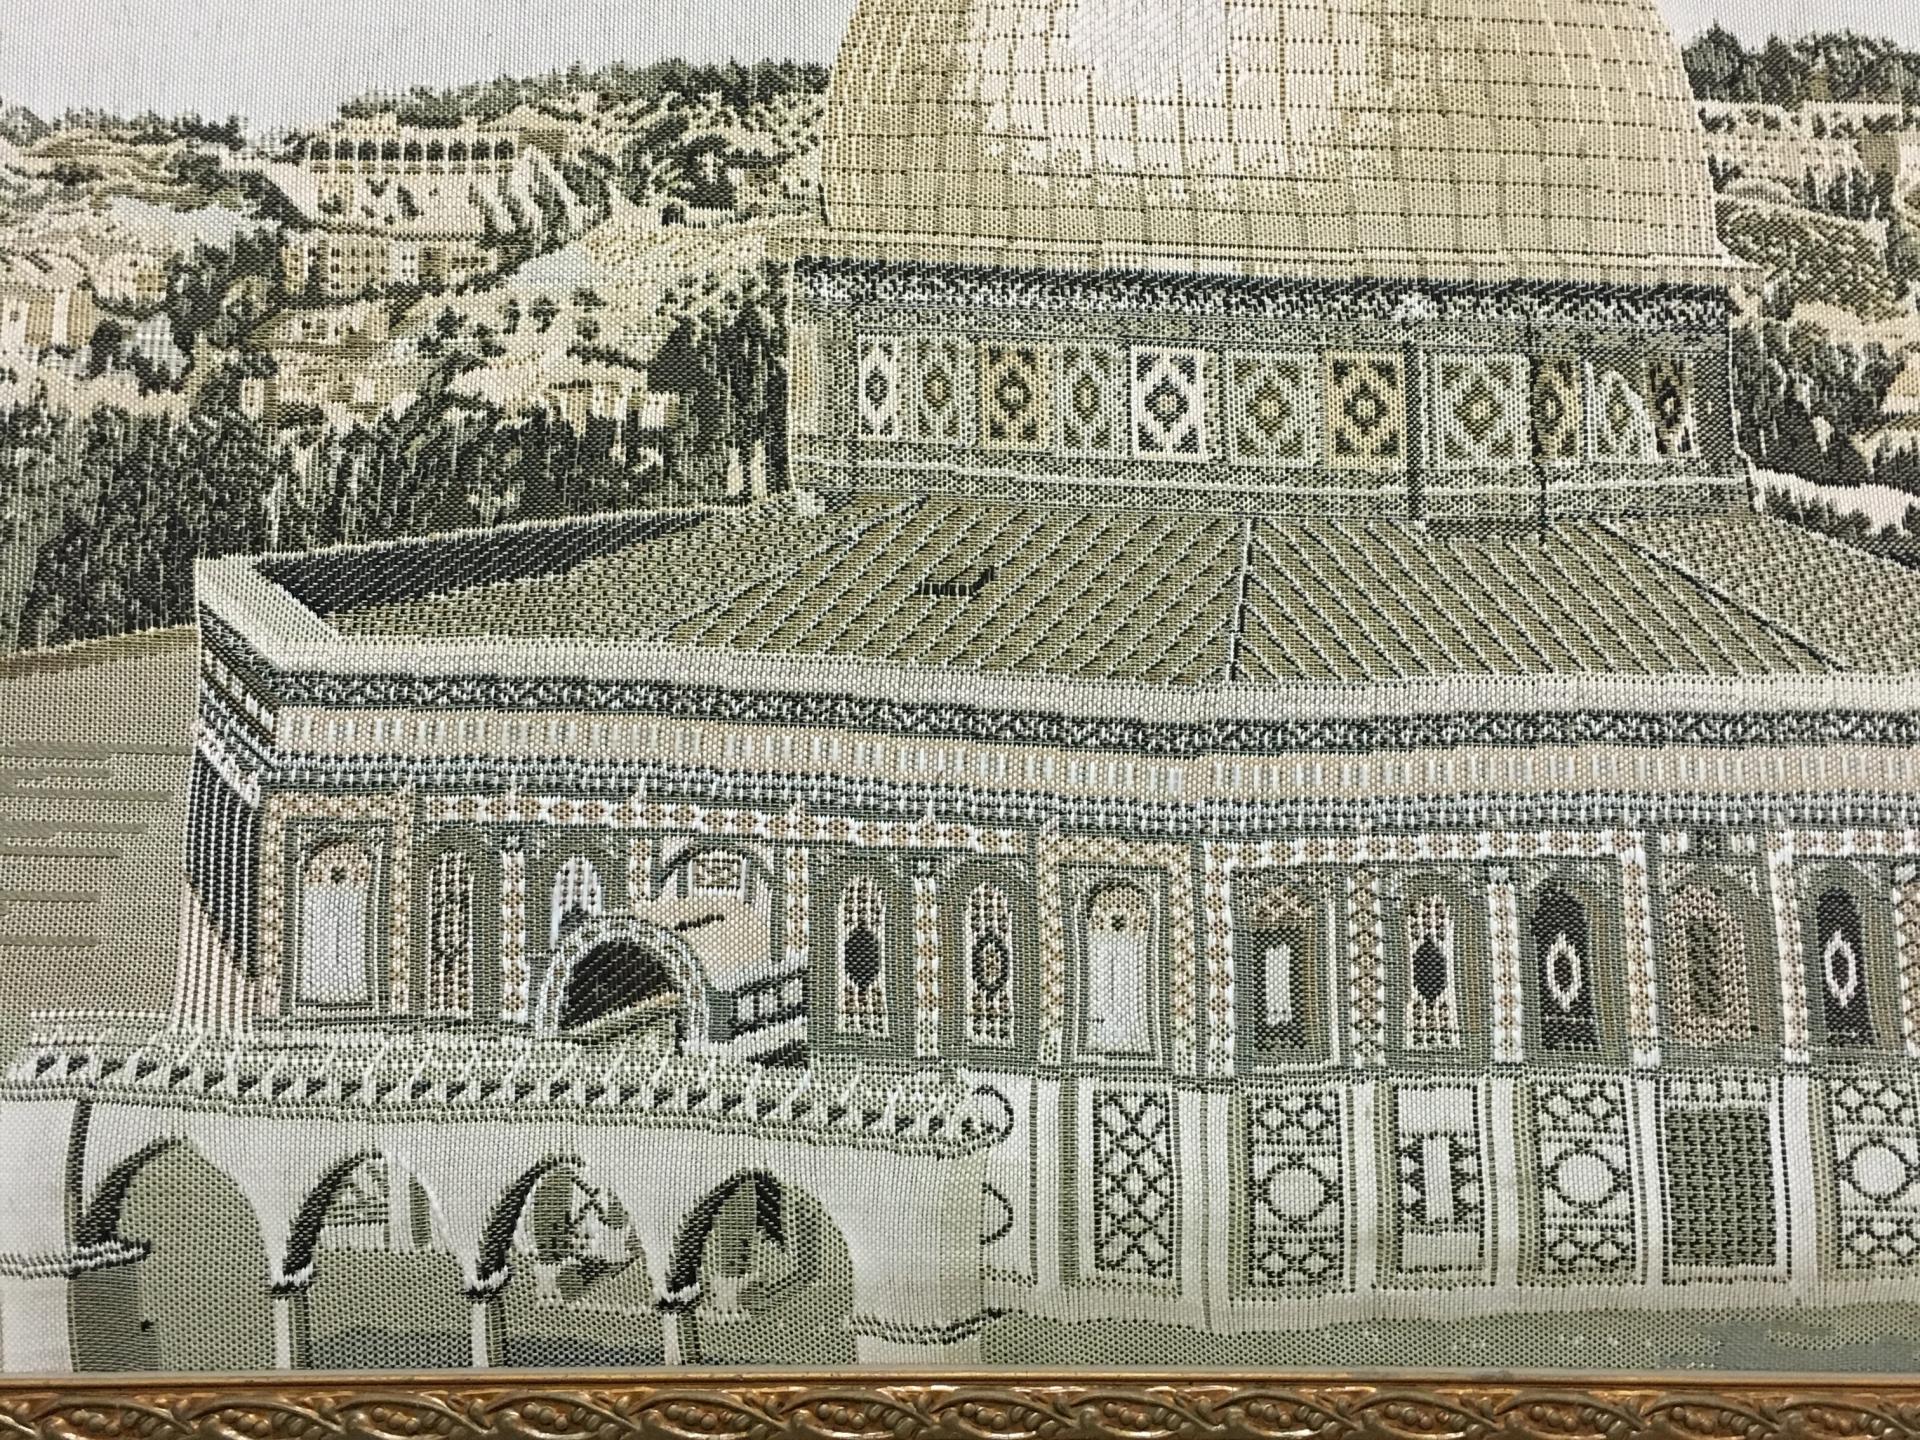 Dome of the Rock picture embroidered